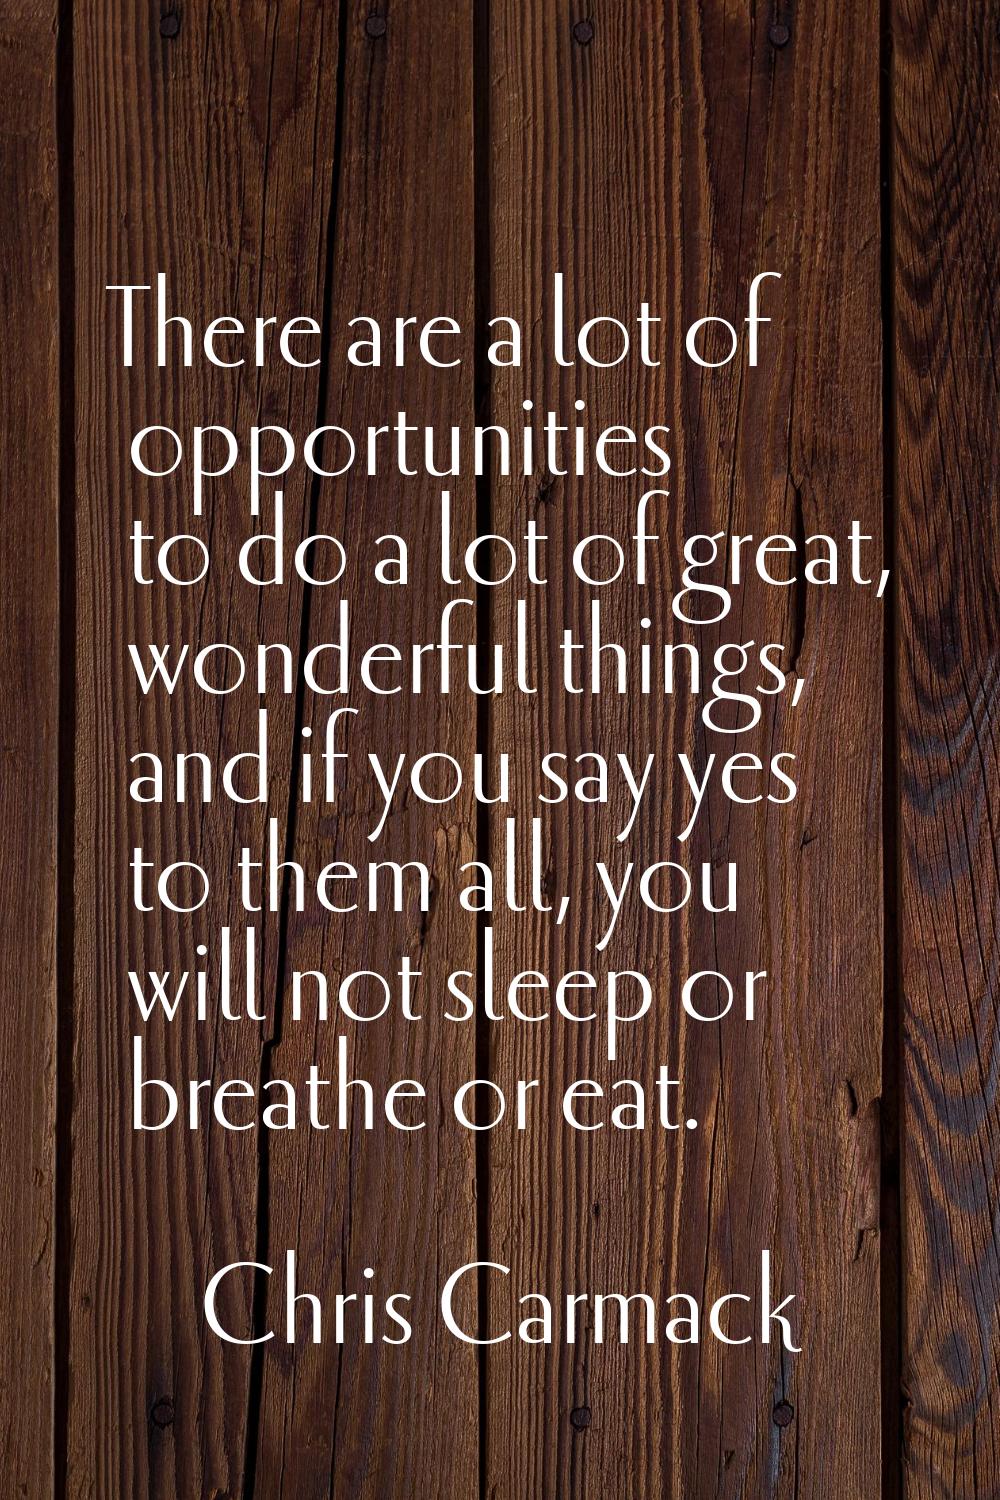 There are a lot of opportunities to do a lot of great, wonderful things, and if you say yes to them